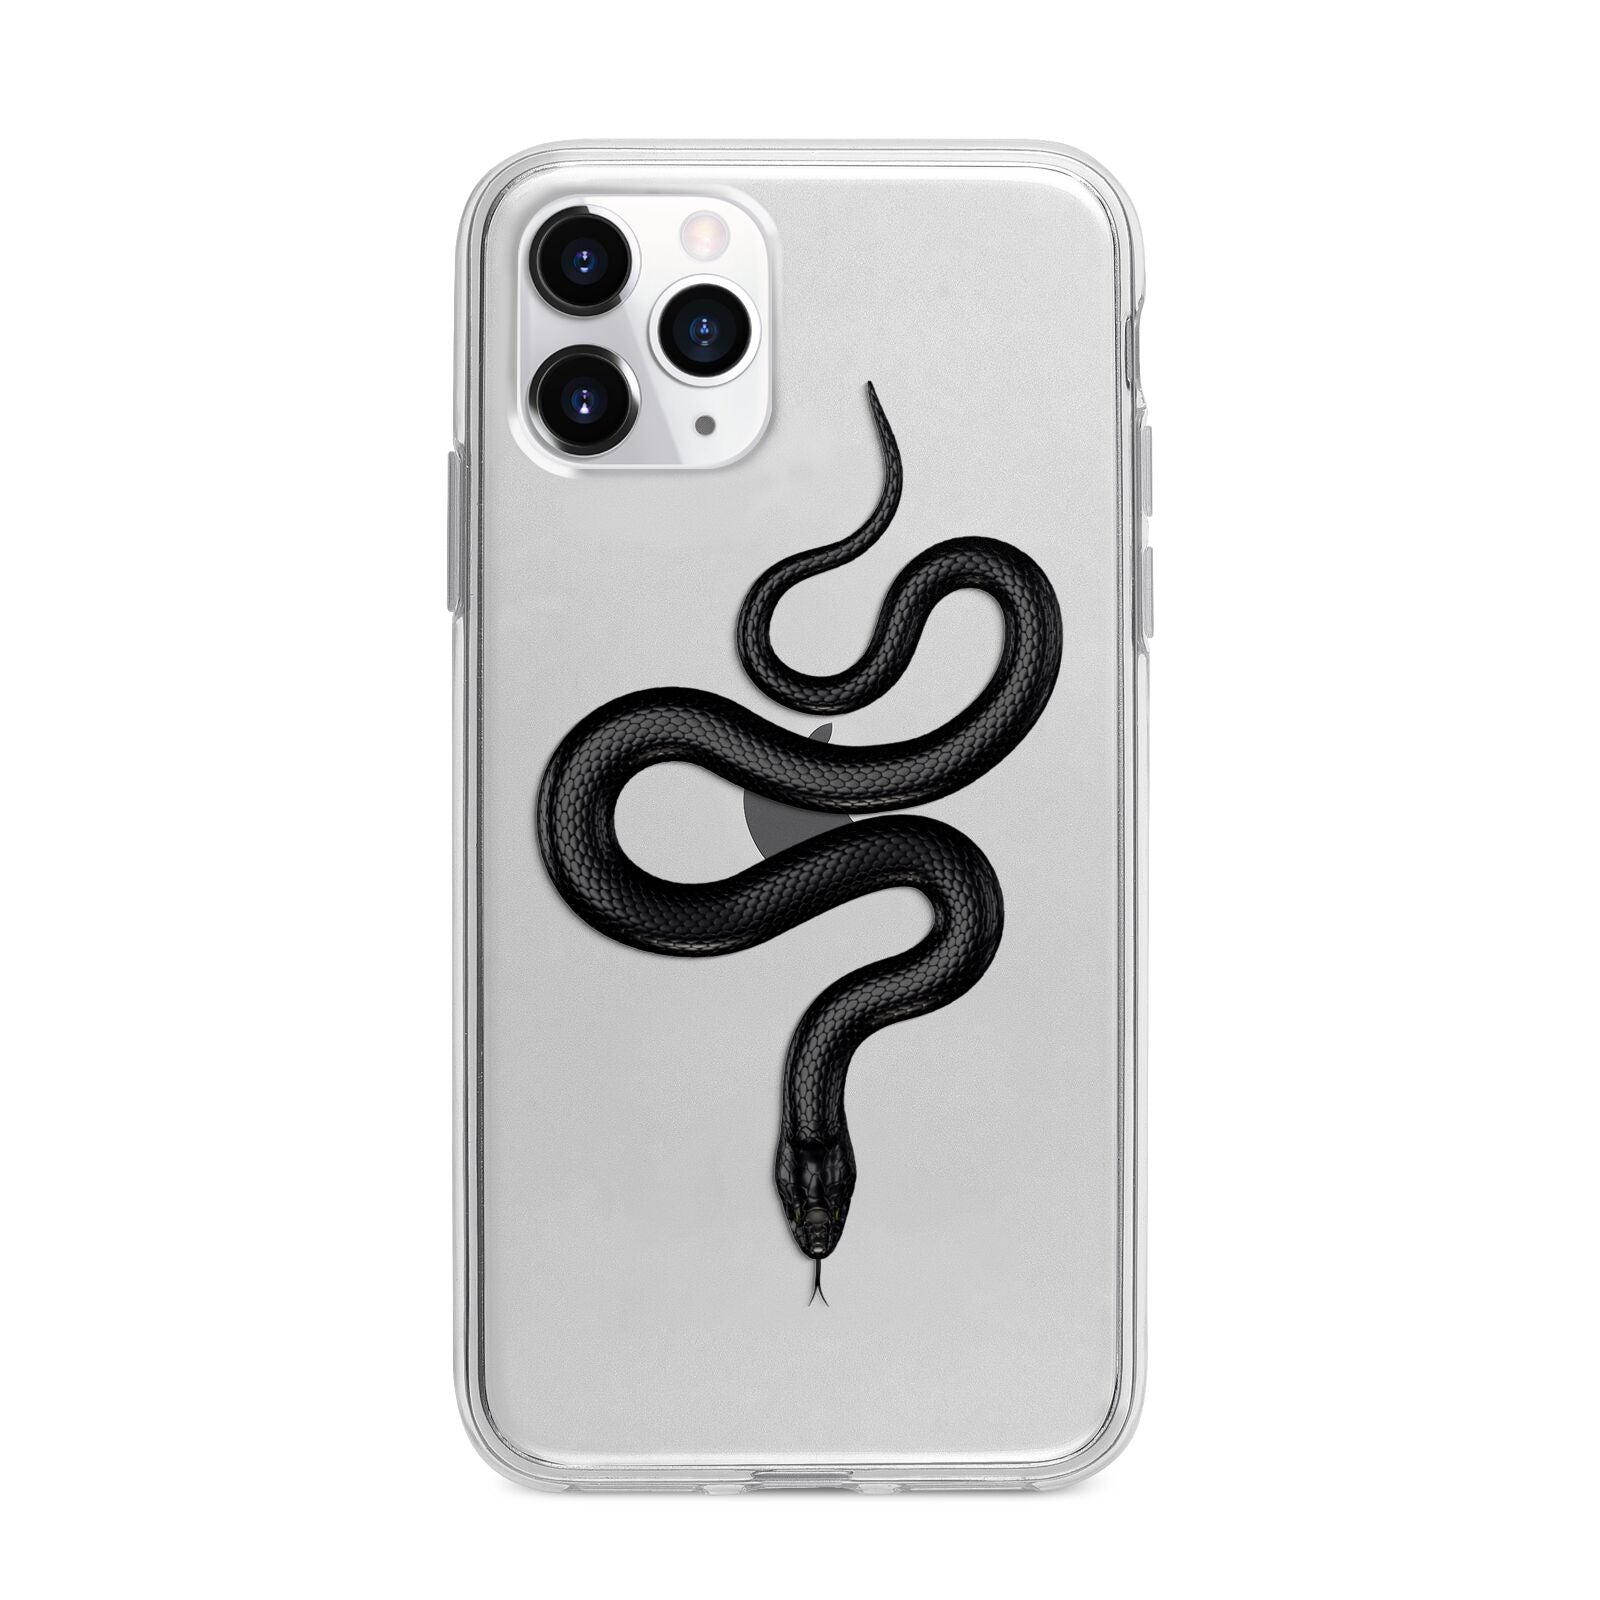 Snake Apple iPhone 11 Pro Max in Silver with Bumper Case